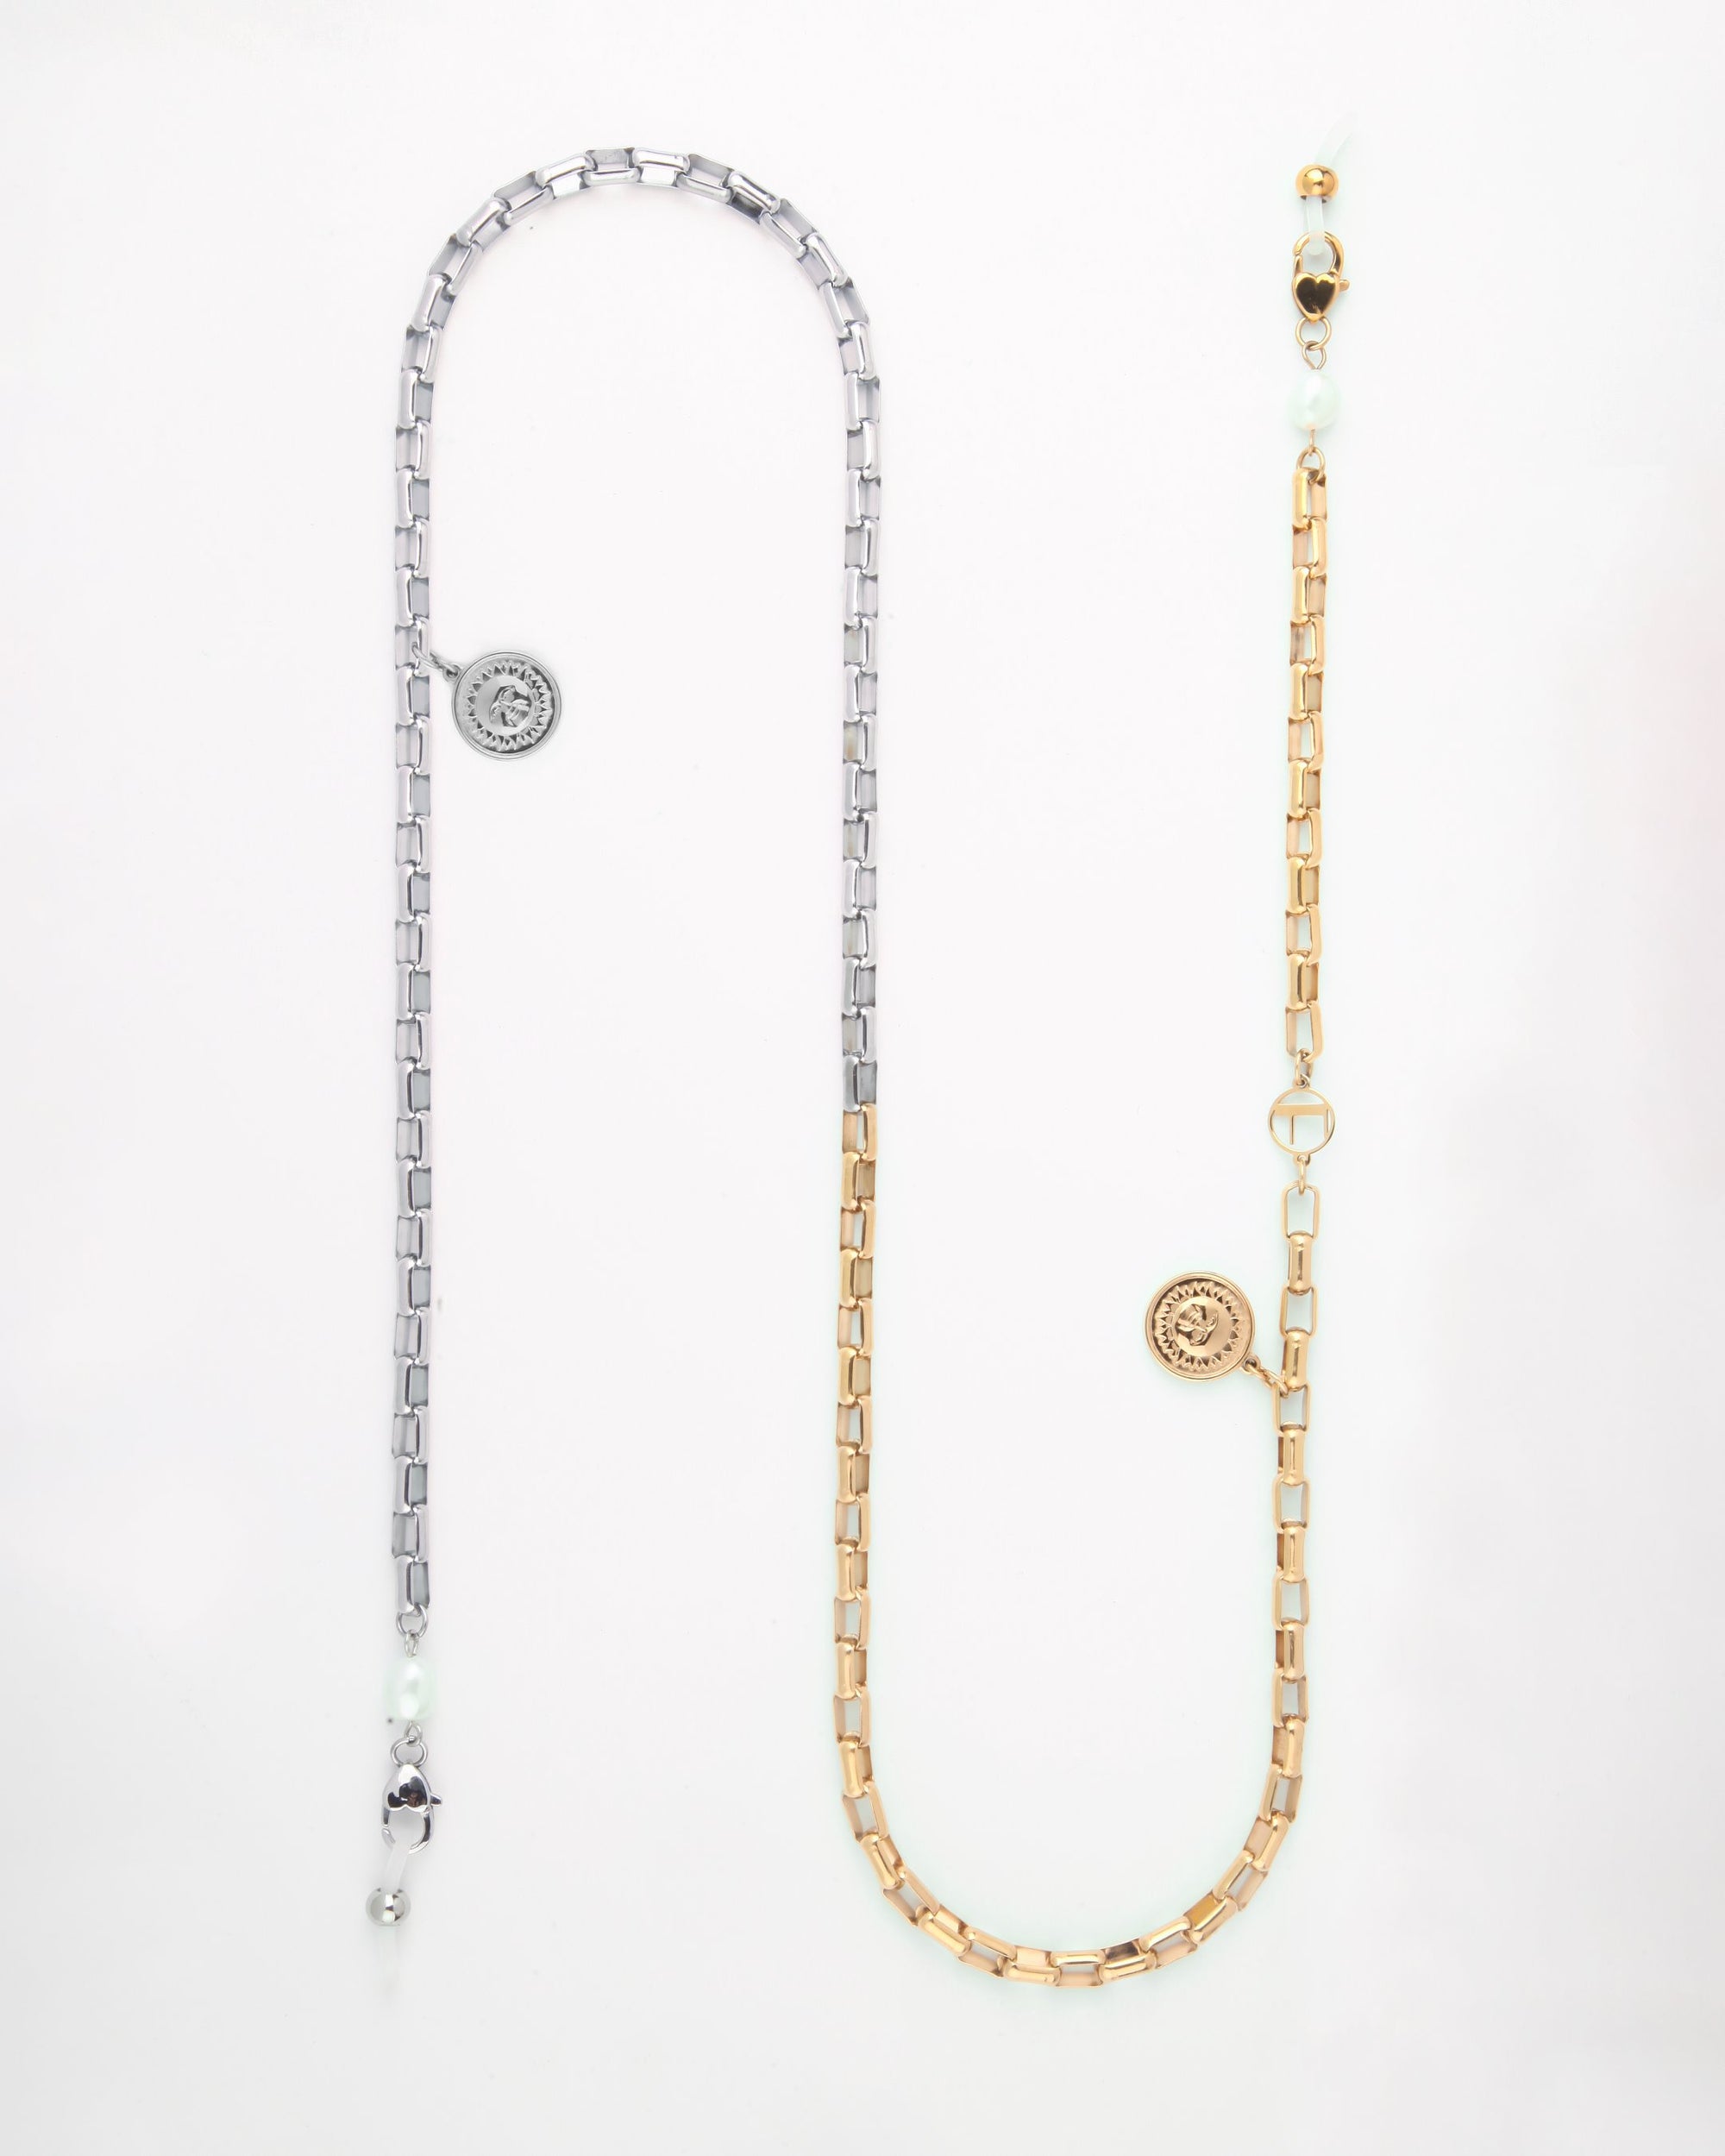 A long, dual-tone glasses chain with two sections: one silver and one gold-toned metal, each featuring rectangular links. Both sections have a round pendant with an intricate design, small white pearls, and a gold circular clasp. This elegant Luna Glasses Chain by For Art&#39;s Sake® perfectly balances sophistication and style.